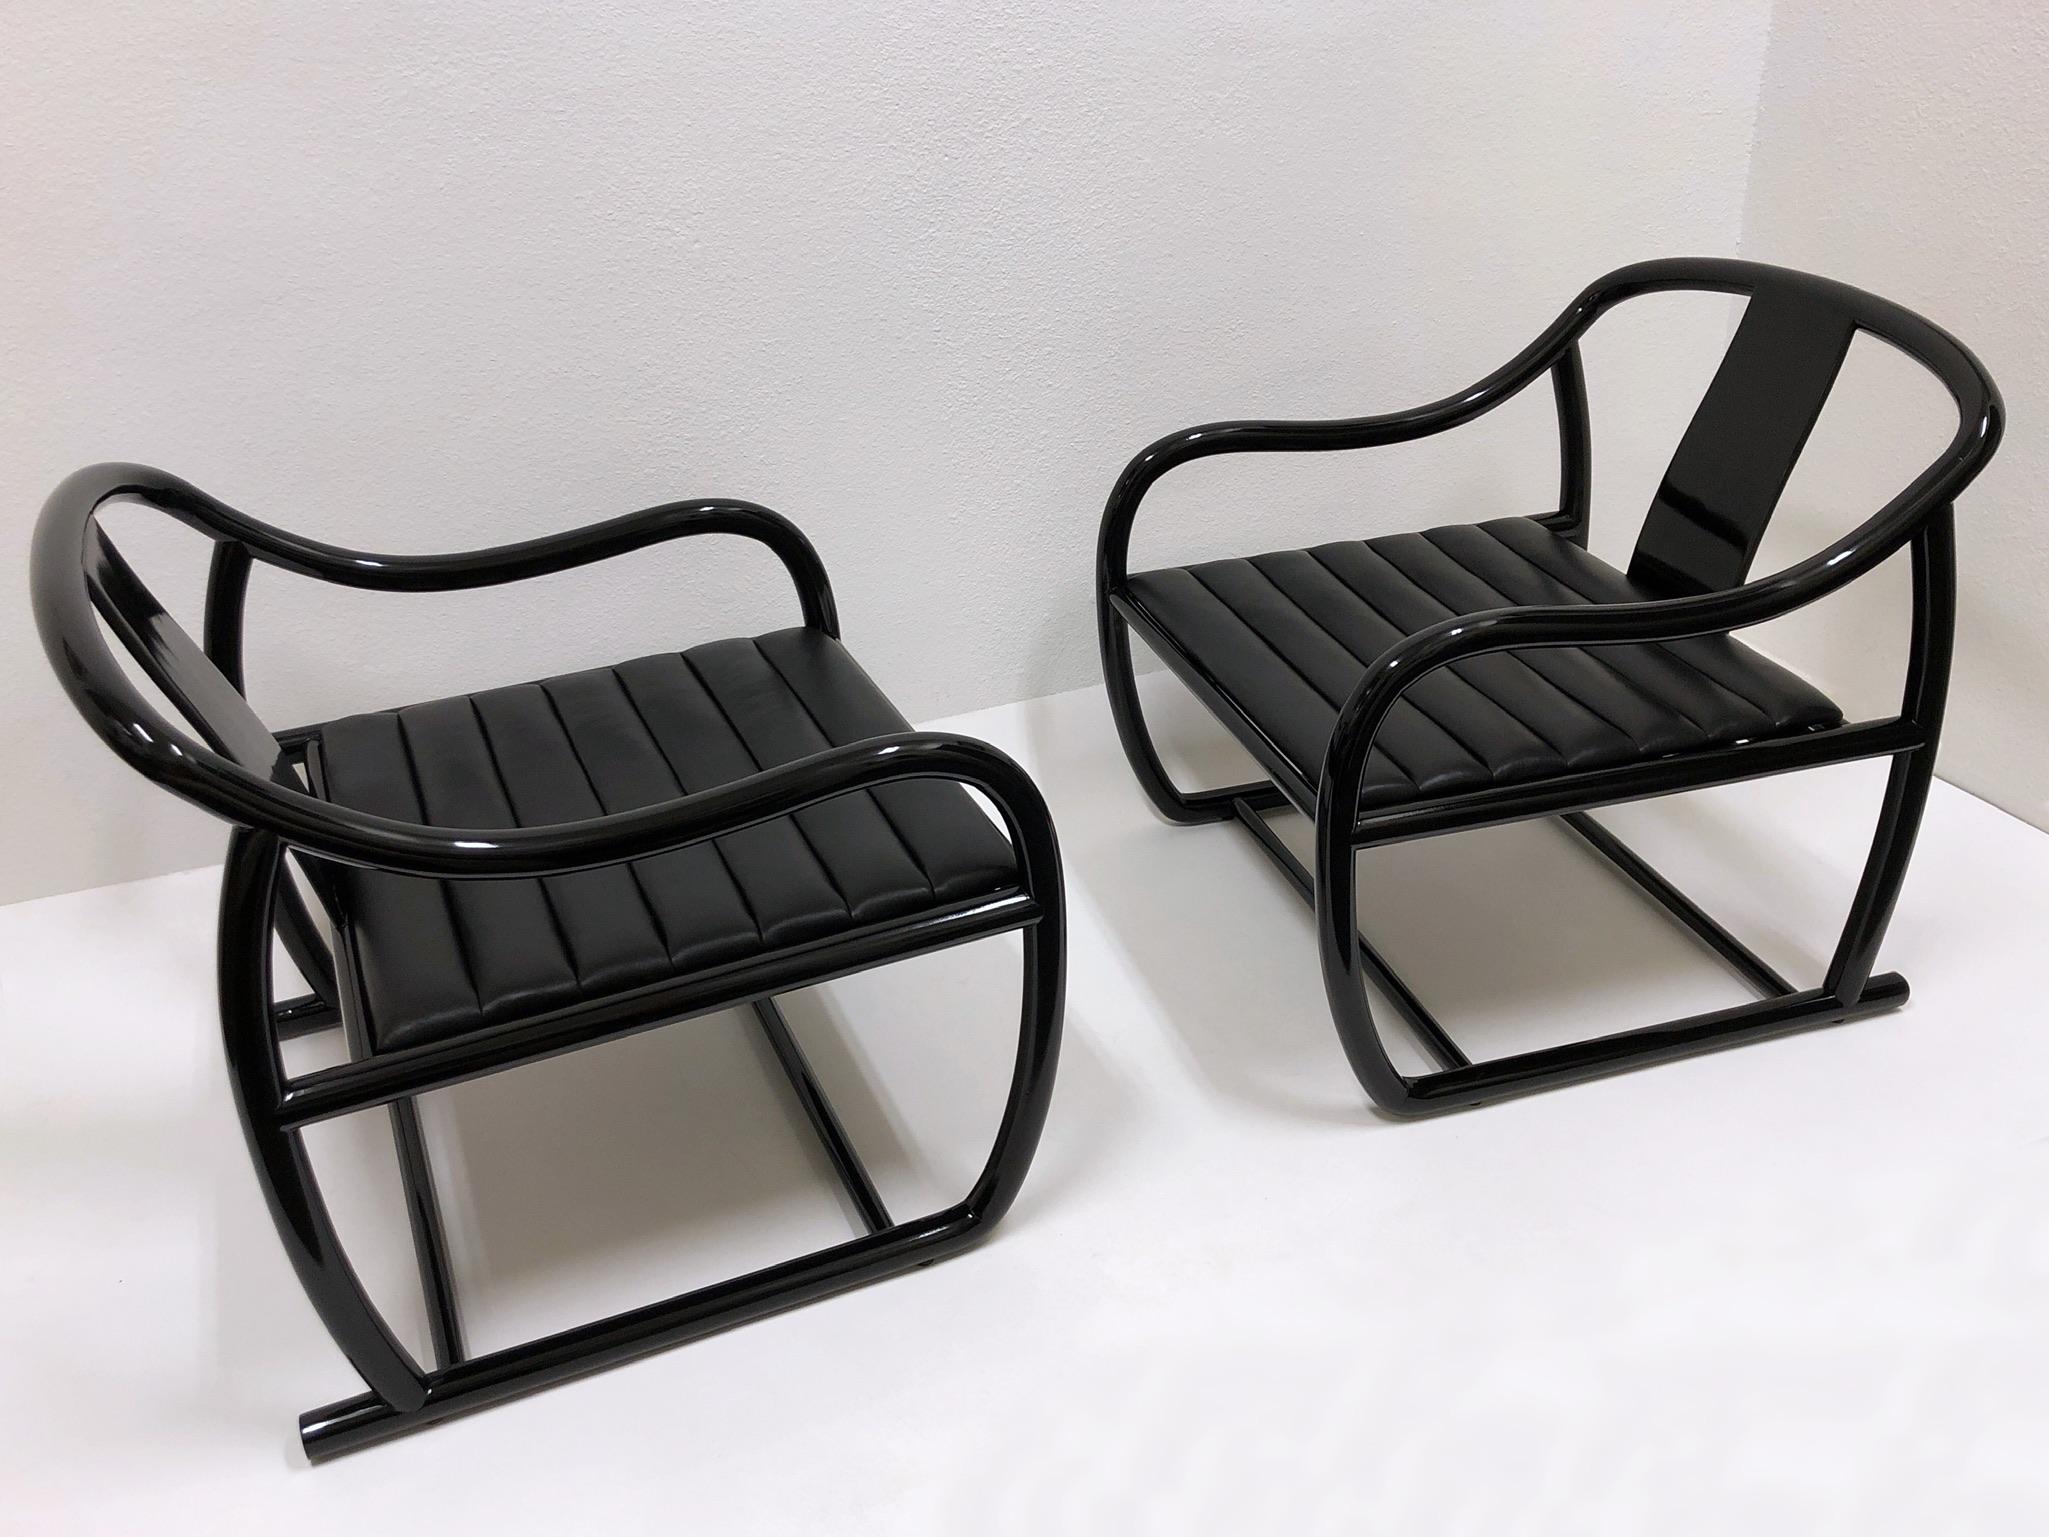 Pair of black lacquered and leather ‘L’Chine’ lounge chairs. Designed by Renowned American designer Stanley Jay Friedman in the 1970s. The chairs are in beautiful vintage condition with minor wear consistent with age.

Measurements: 28” wide,